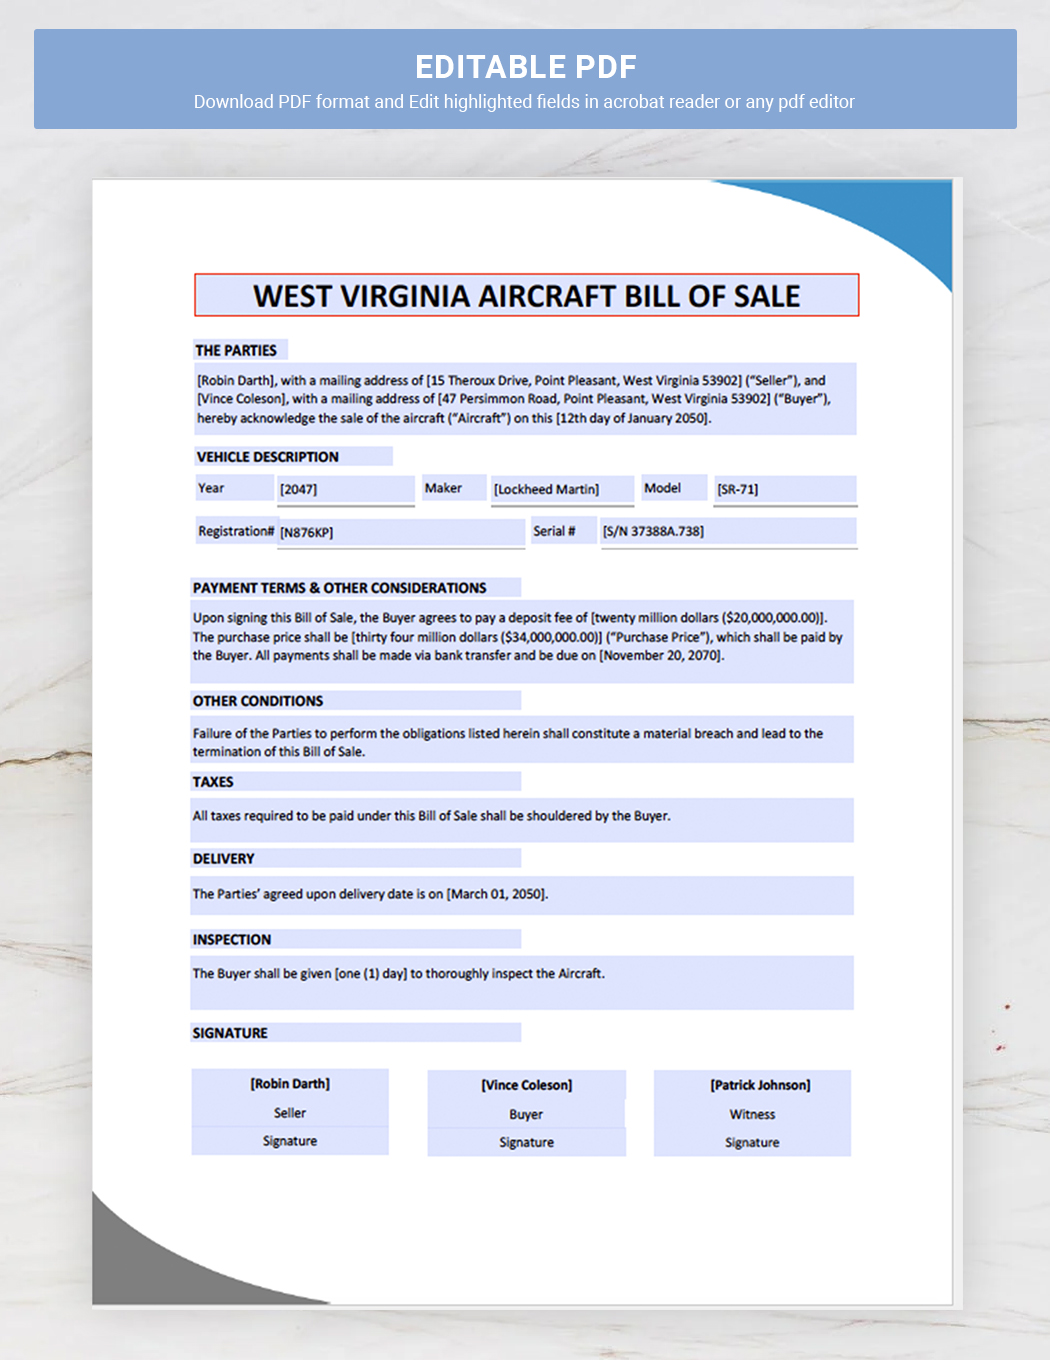 West Virginia Aircraft / Airplane Bill of Sale Template